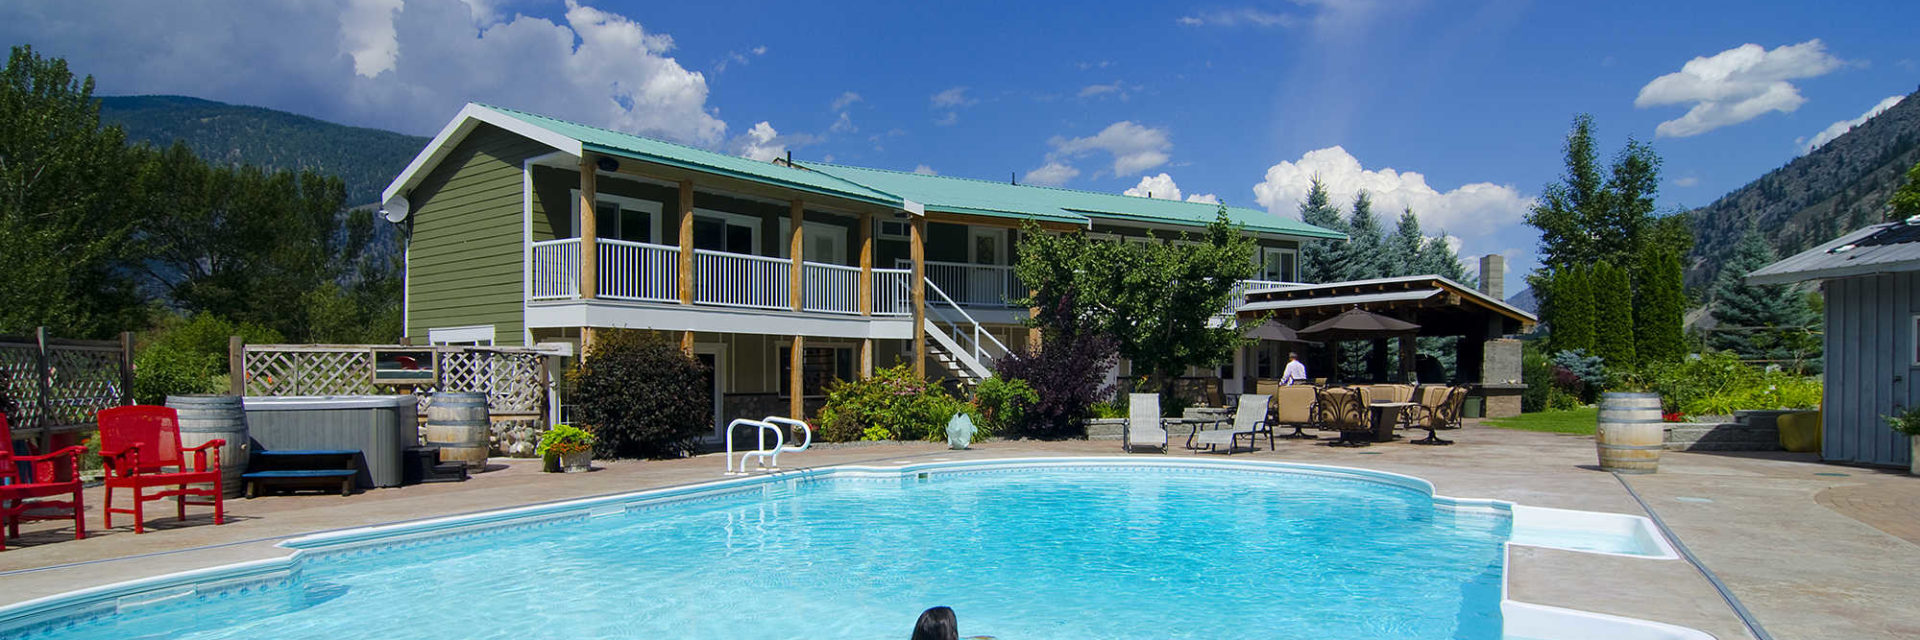 Motels, Inns and Lodges in the Similkameen Valley